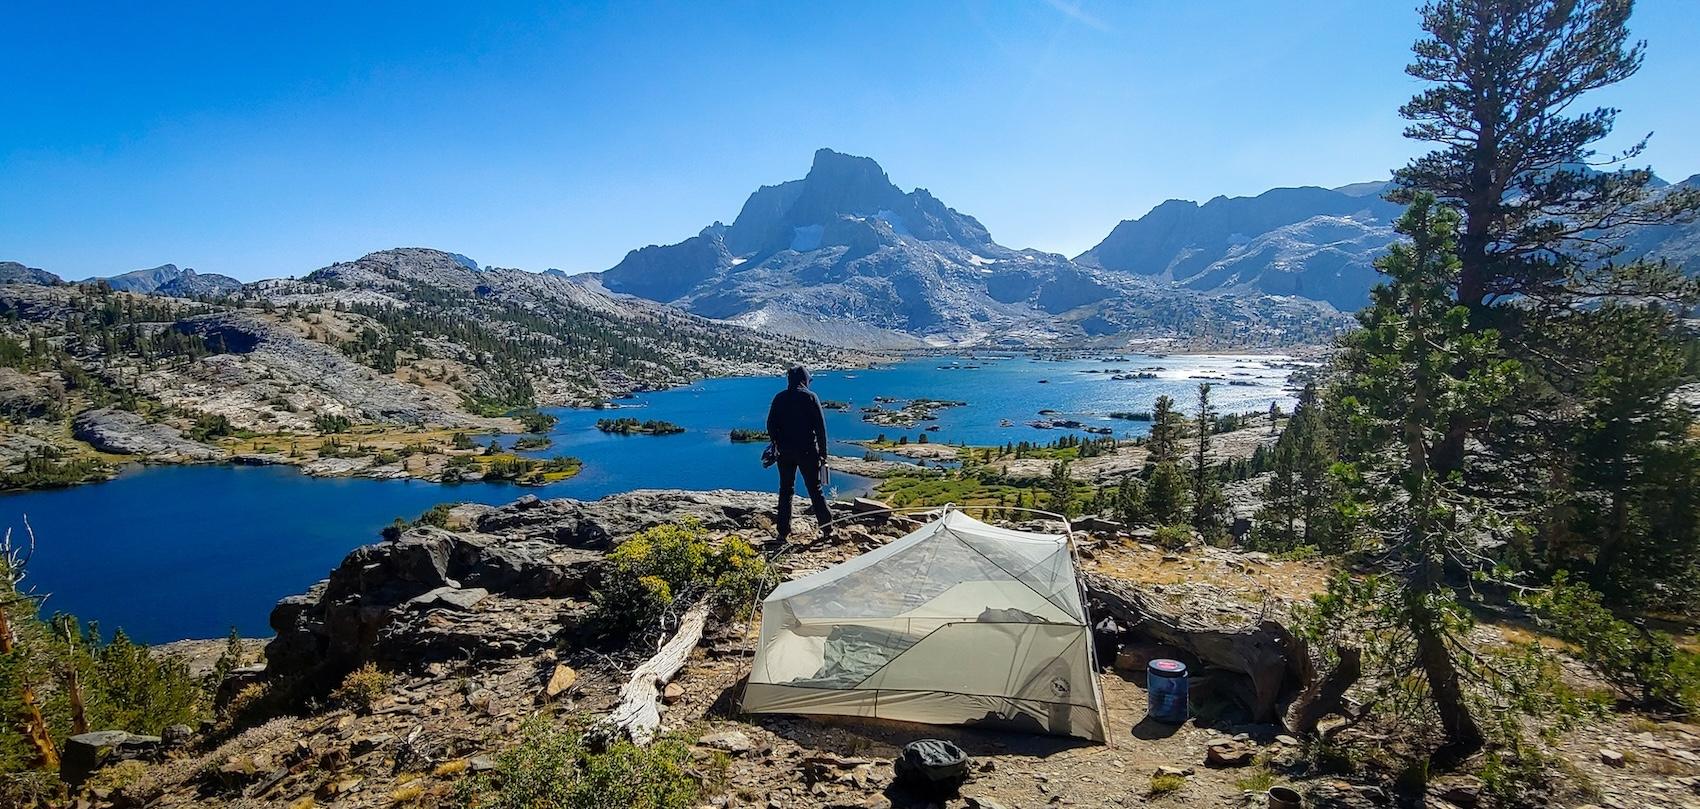 Panoramic view of Thousand Island Island Lake in the Sierras. Photo by Brock Dallman